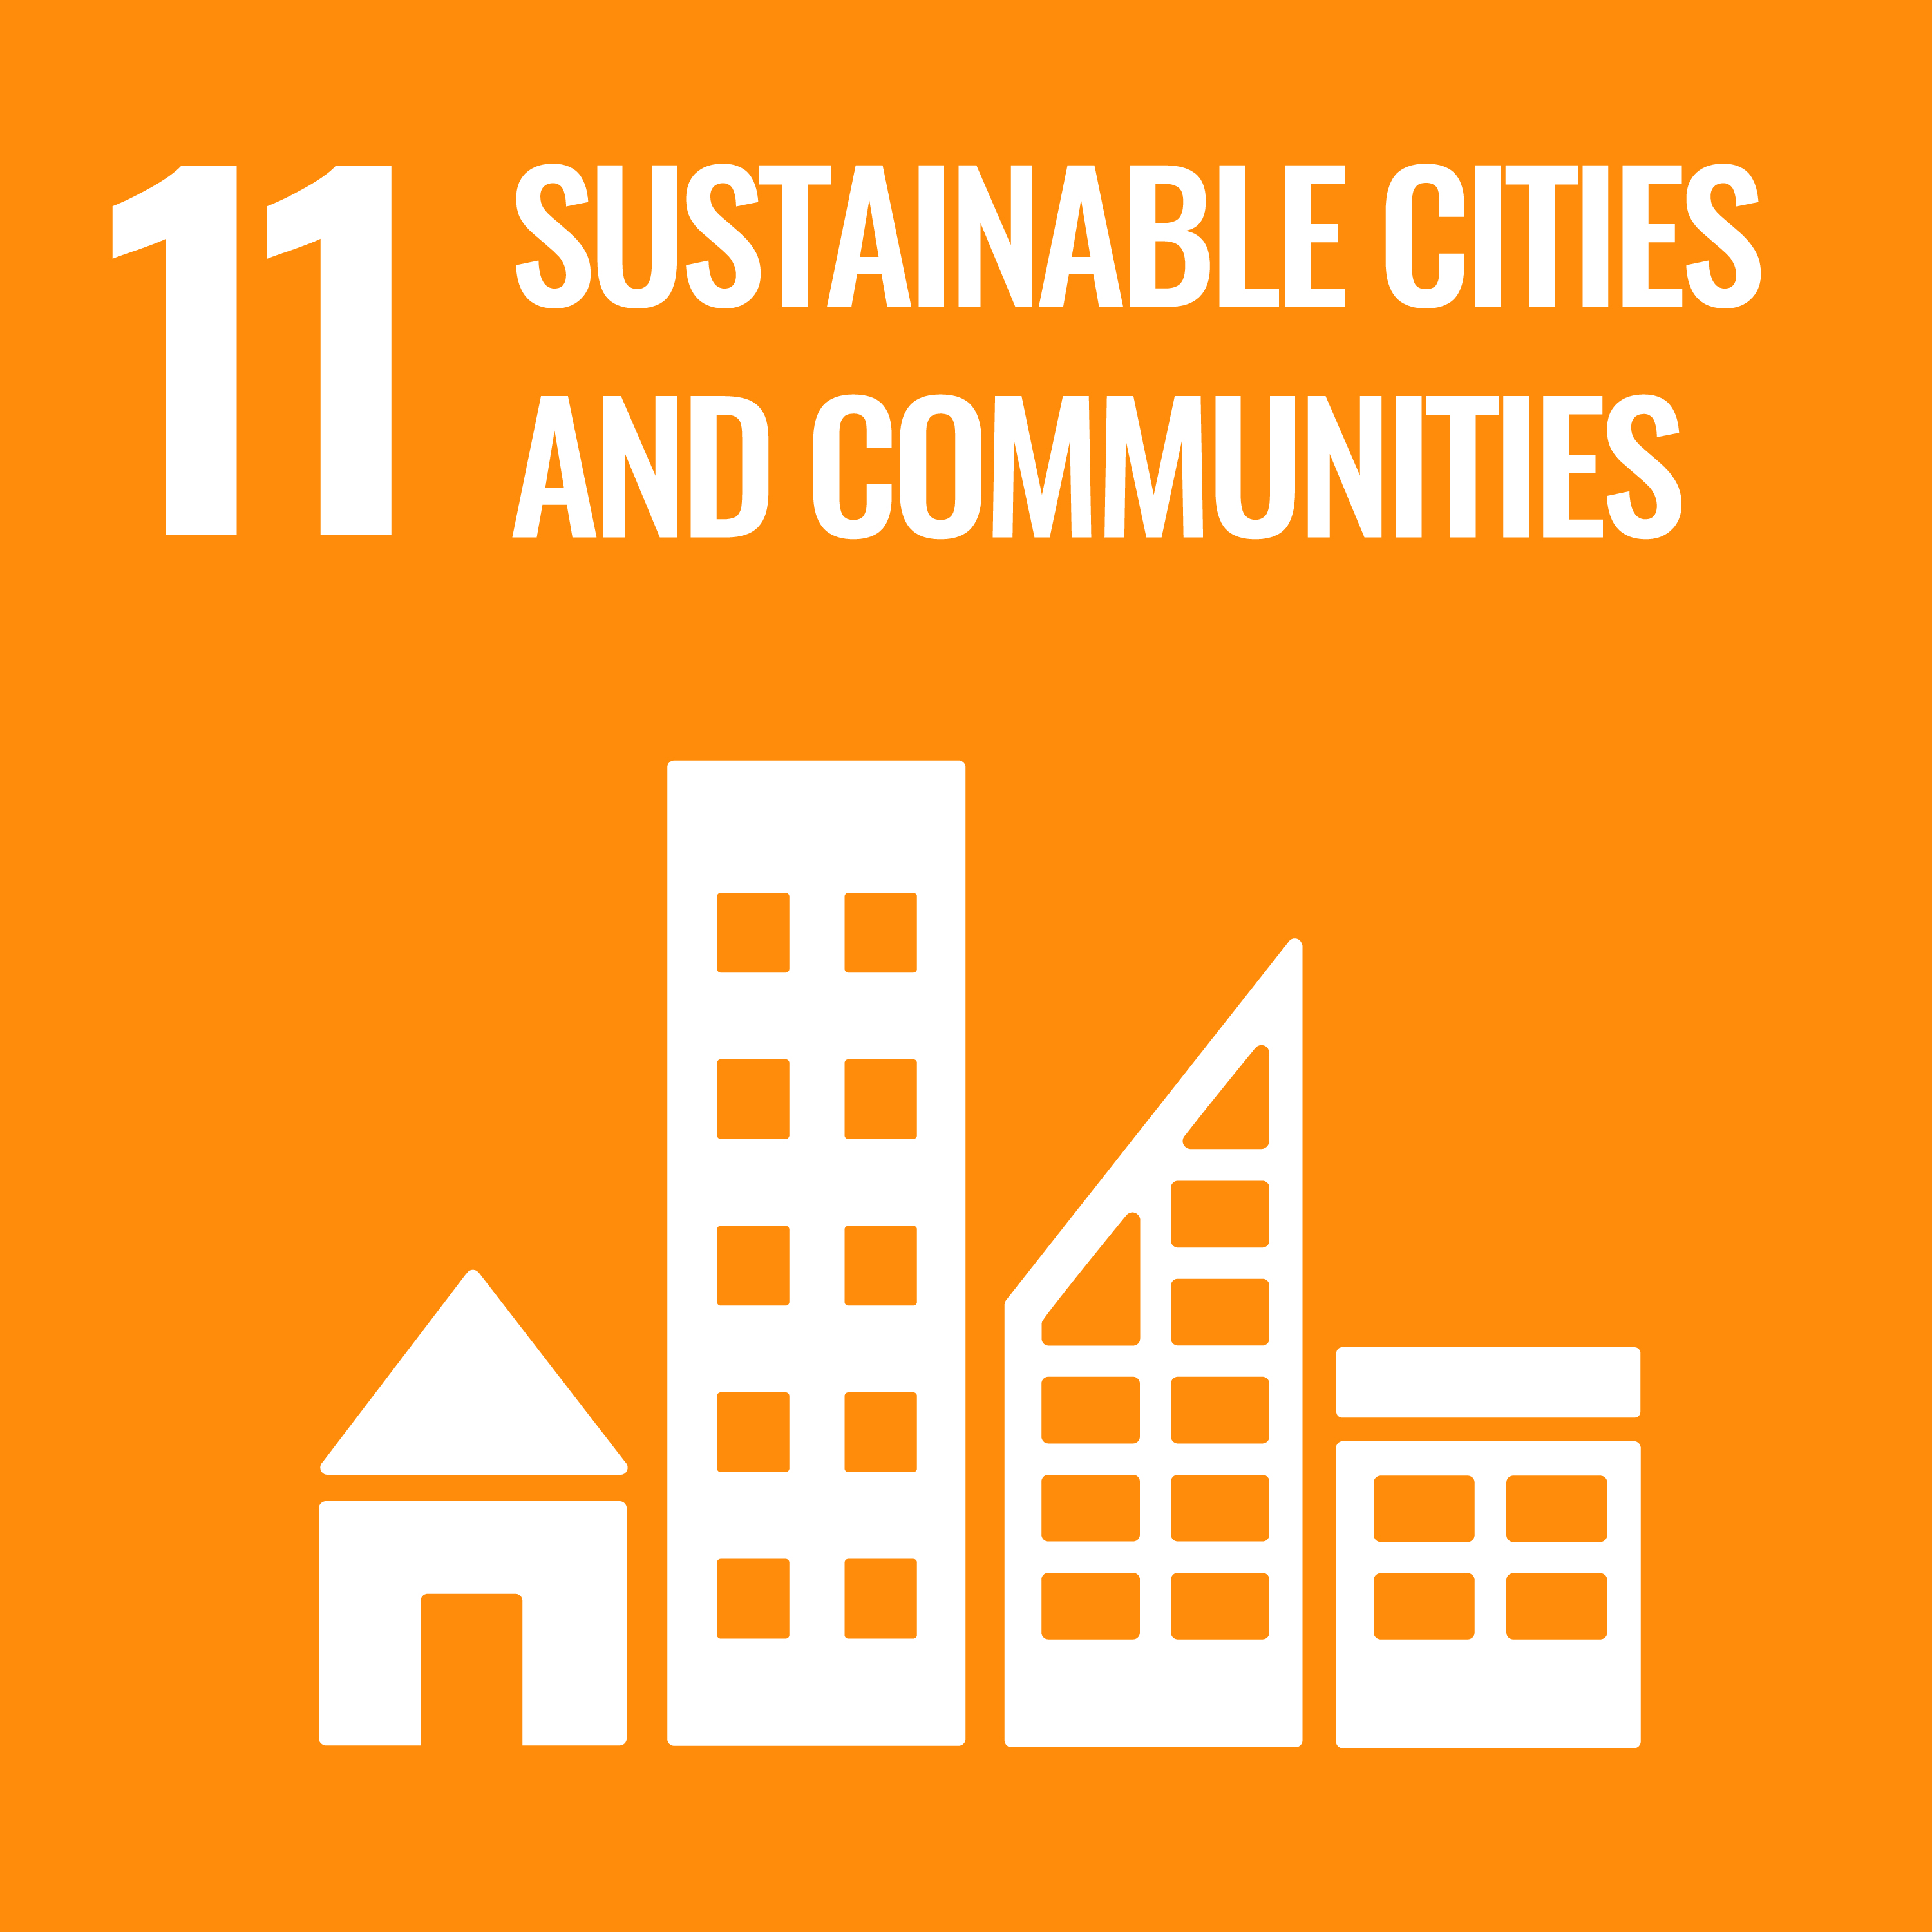 11 Sustainable Cities an Communities (United Nations)